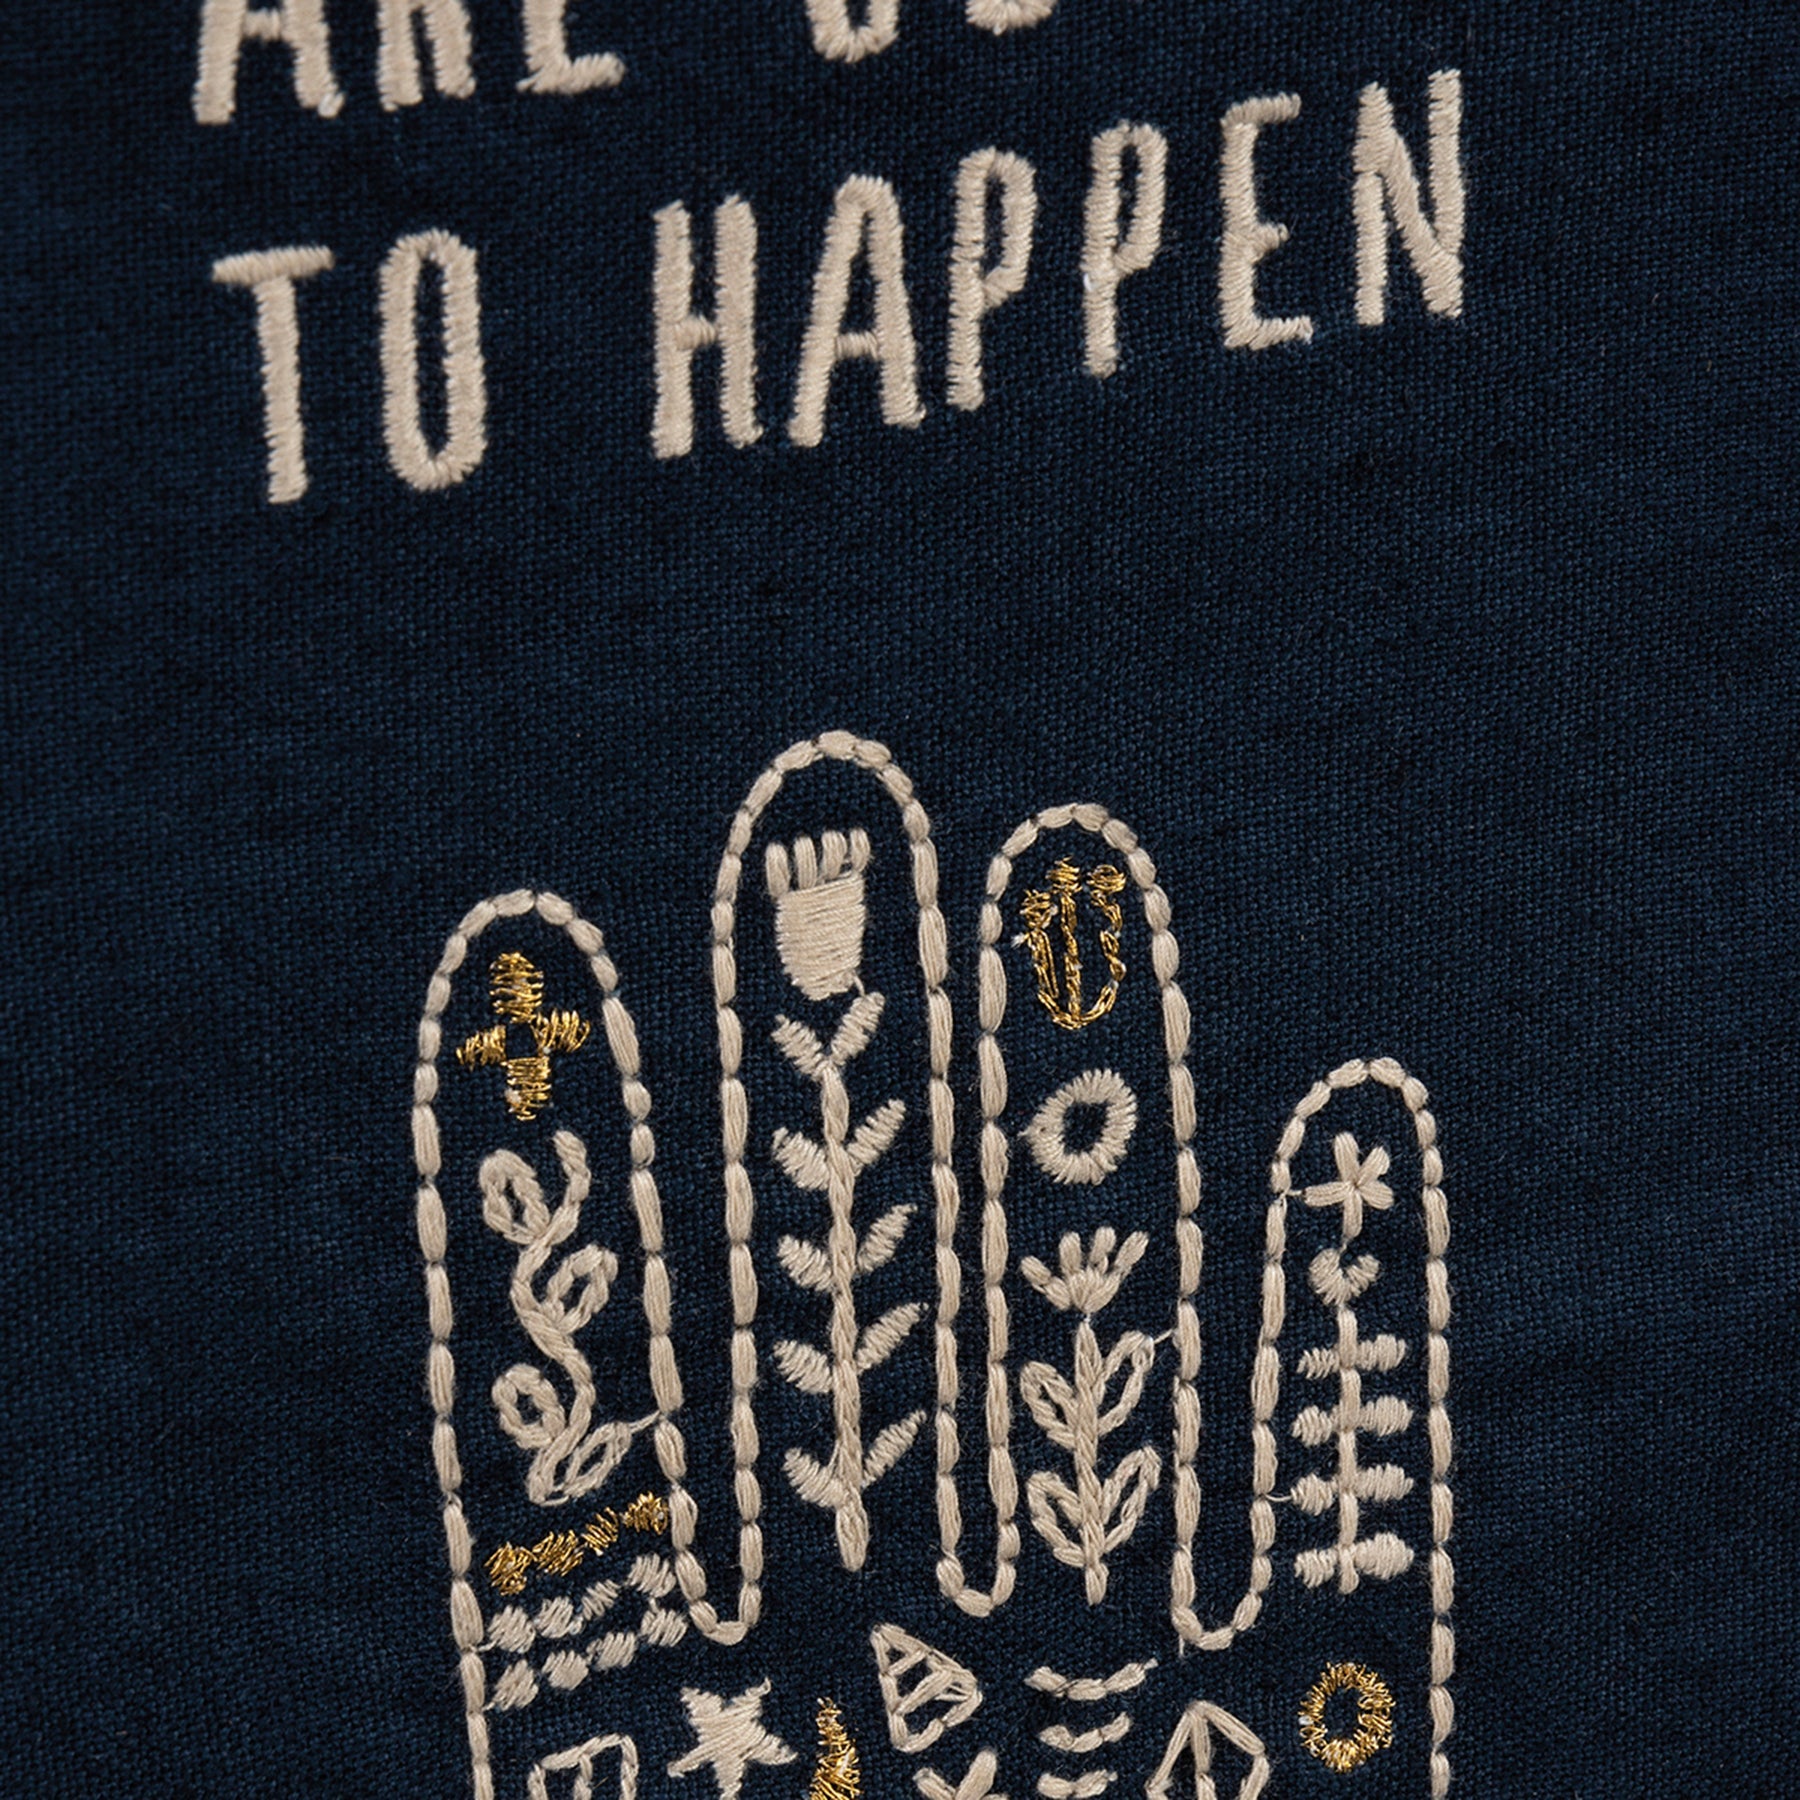 Good Things Are Going To Happen Dish Cloth Towel | Cotton and Linen | Embroidered with Tassels | 20" x 26"